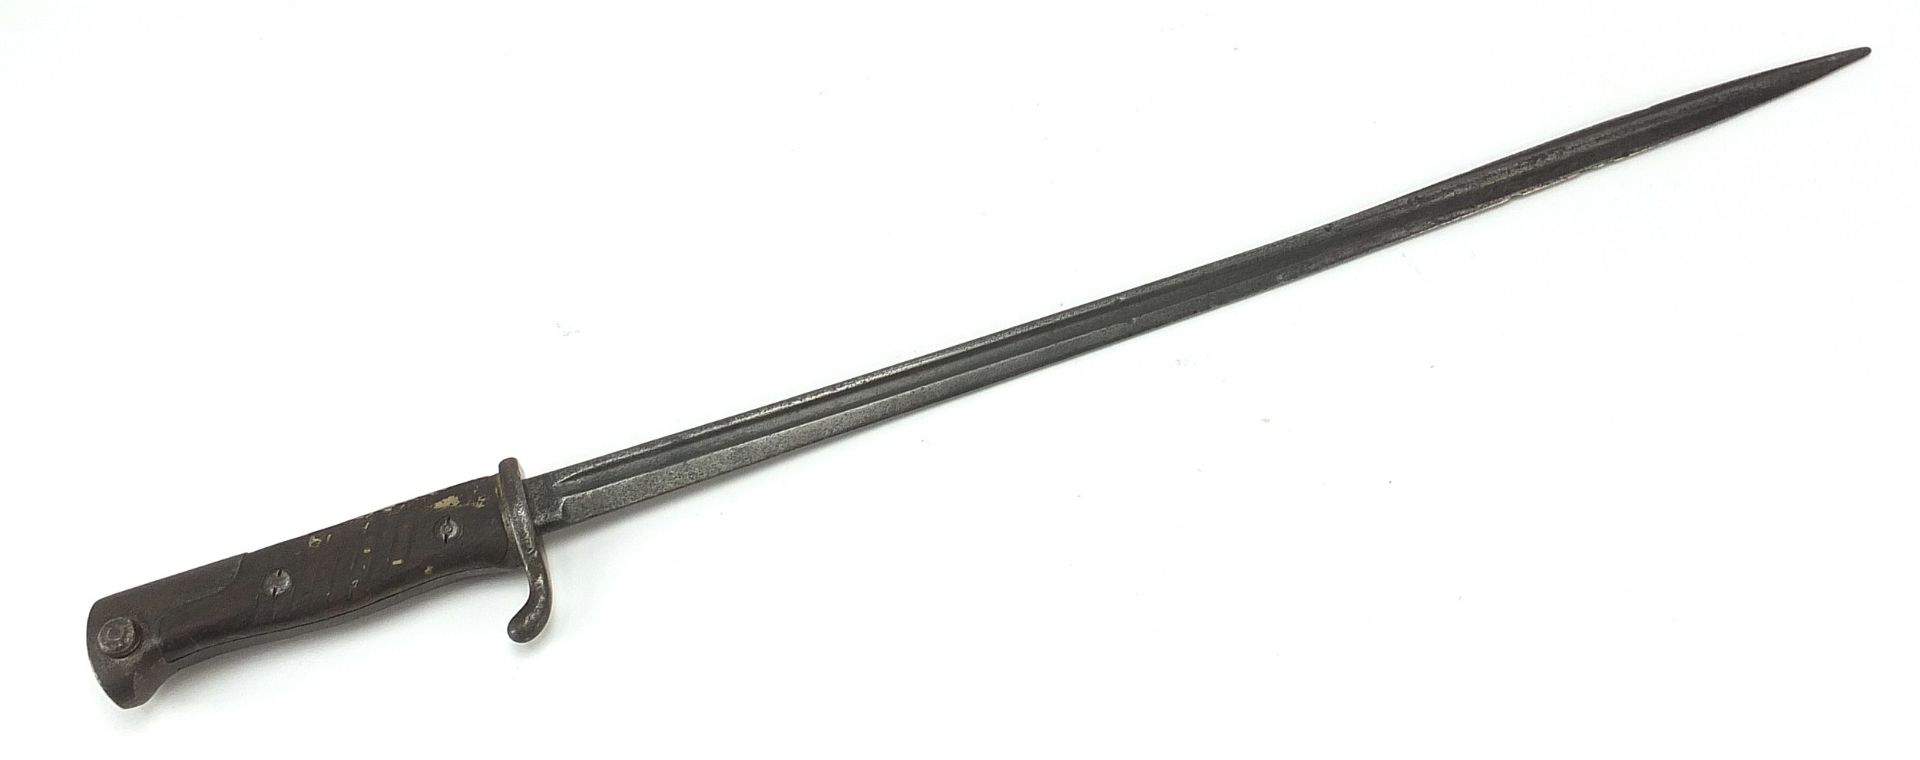 German military interest S98 bayonet, 64cm in length - Image 3 of 4